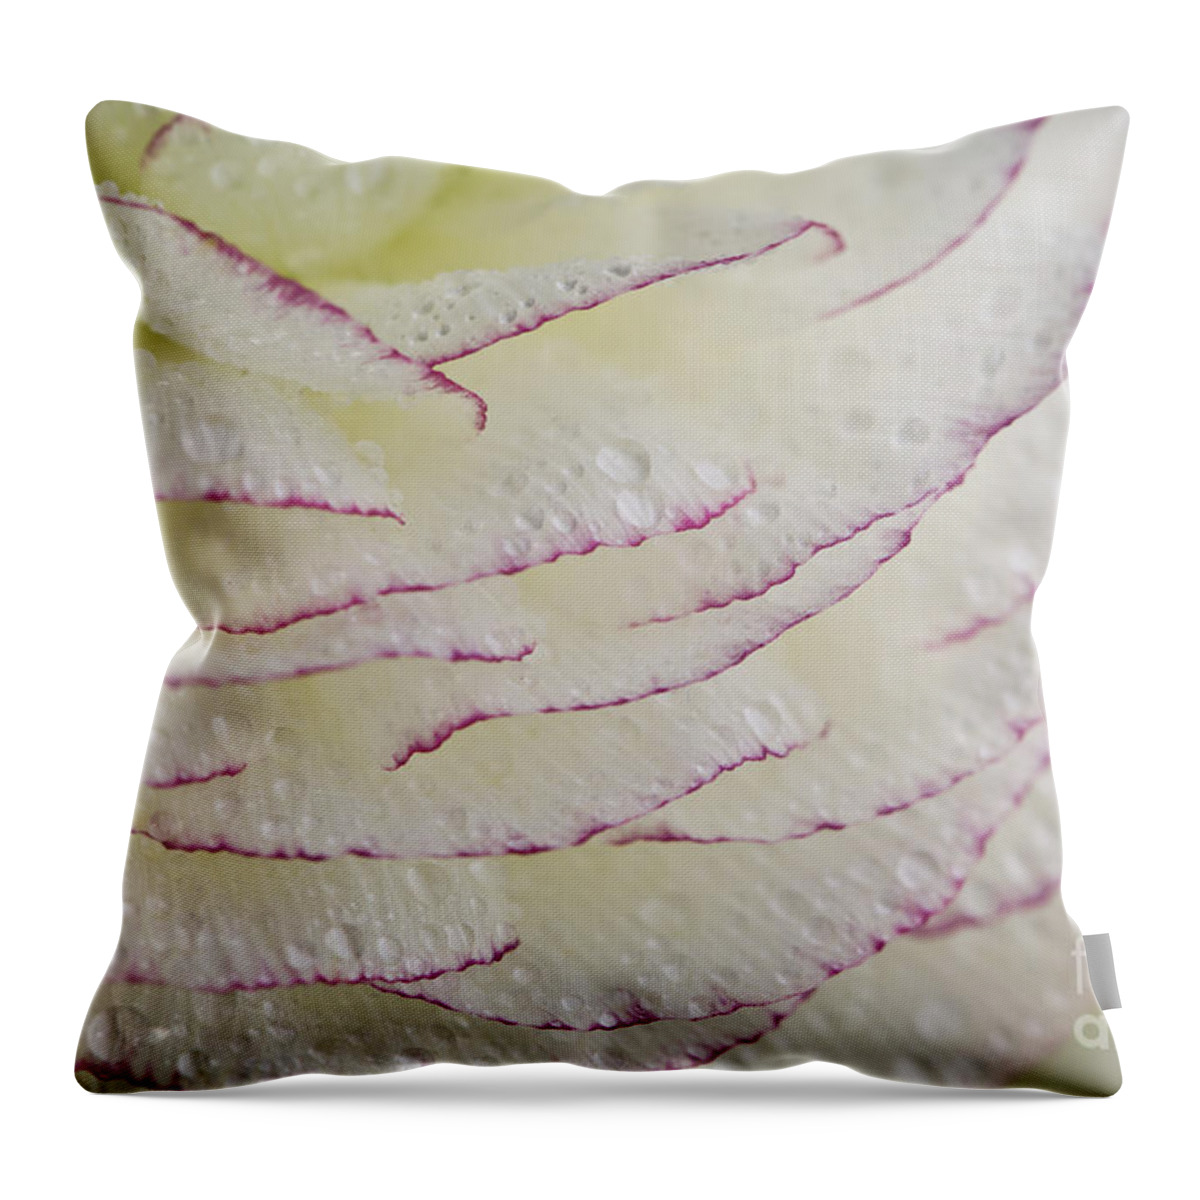 Buttercup Throw Pillow featuring the photograph Buttercup flower with Dew by Nailia Schwarz